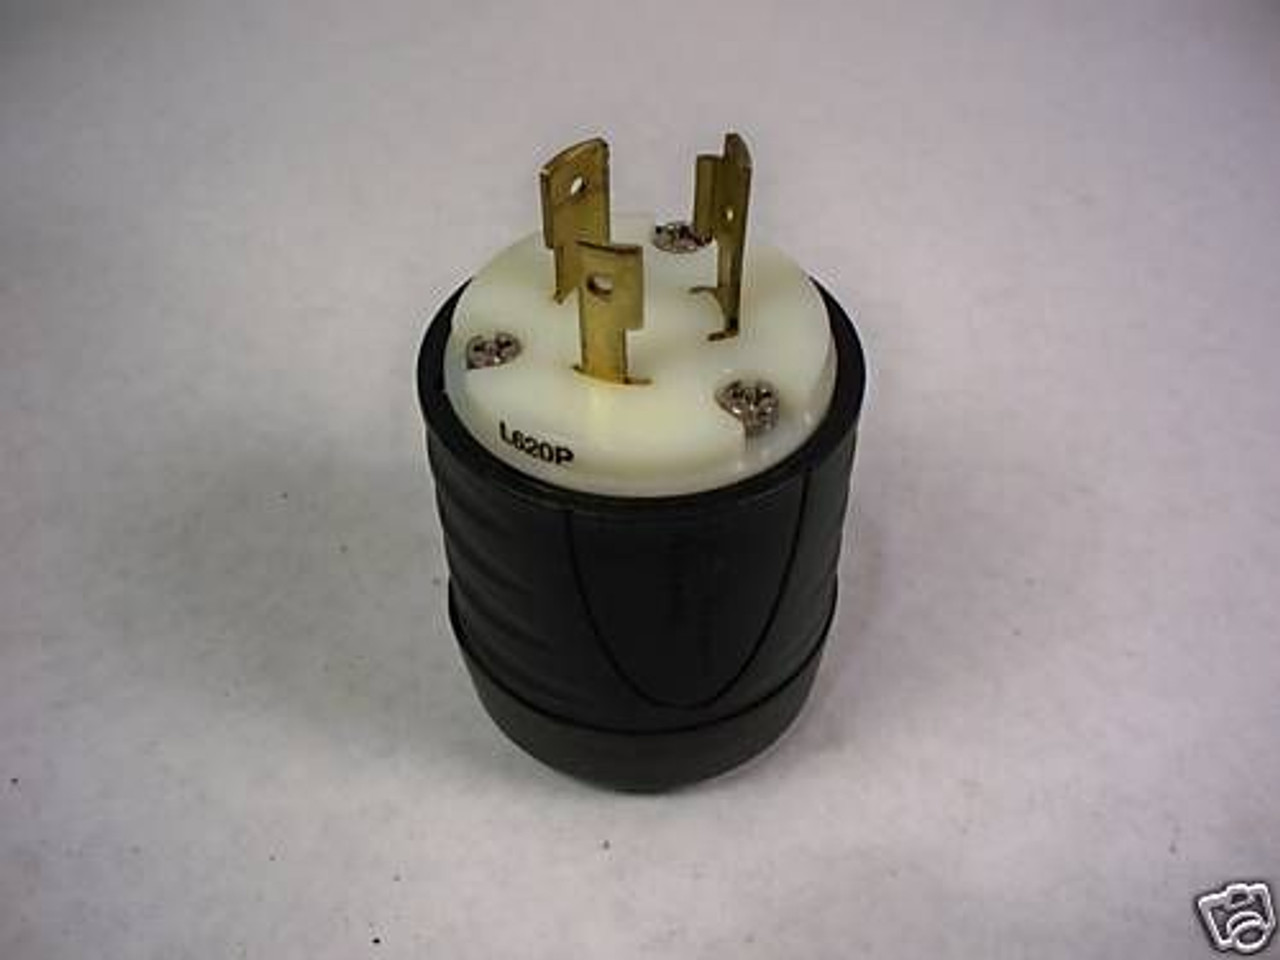 PASS&SEYMOUR L620P Male Connector 20A  250V USED